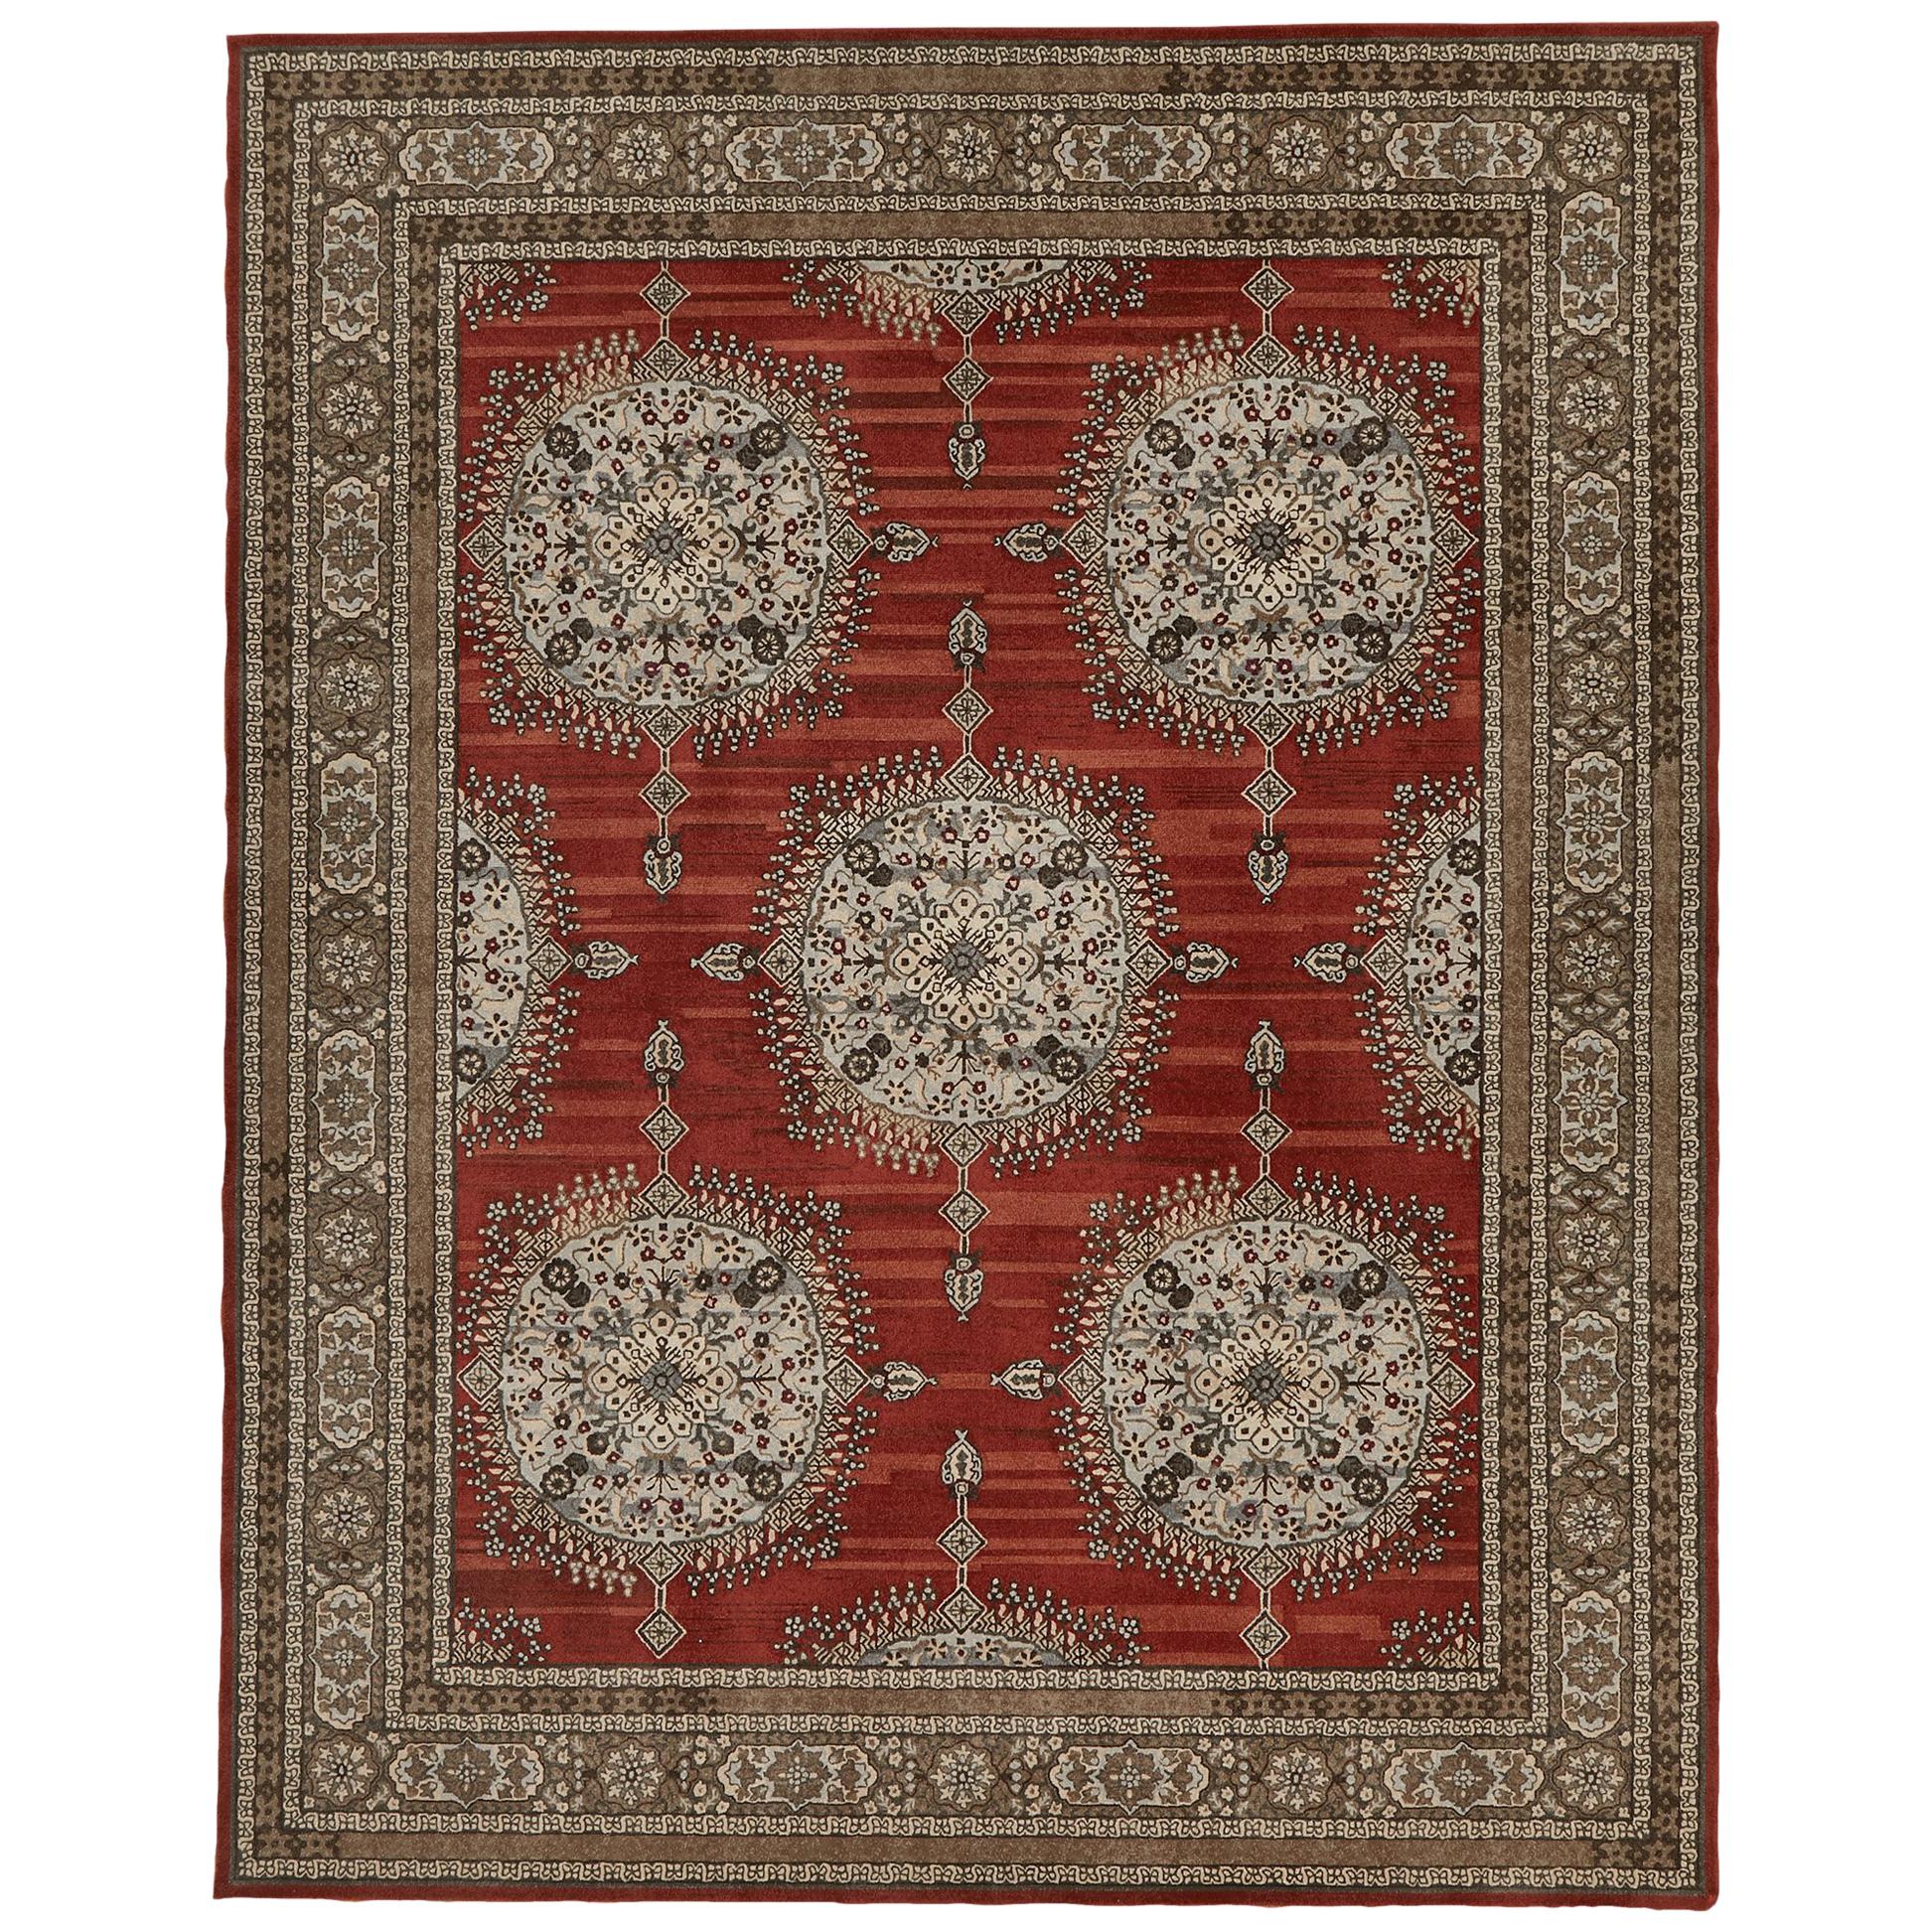 Schumacher Amritsar Area Rug in Hand-Tufted Wool by Patterson Flynn Martin